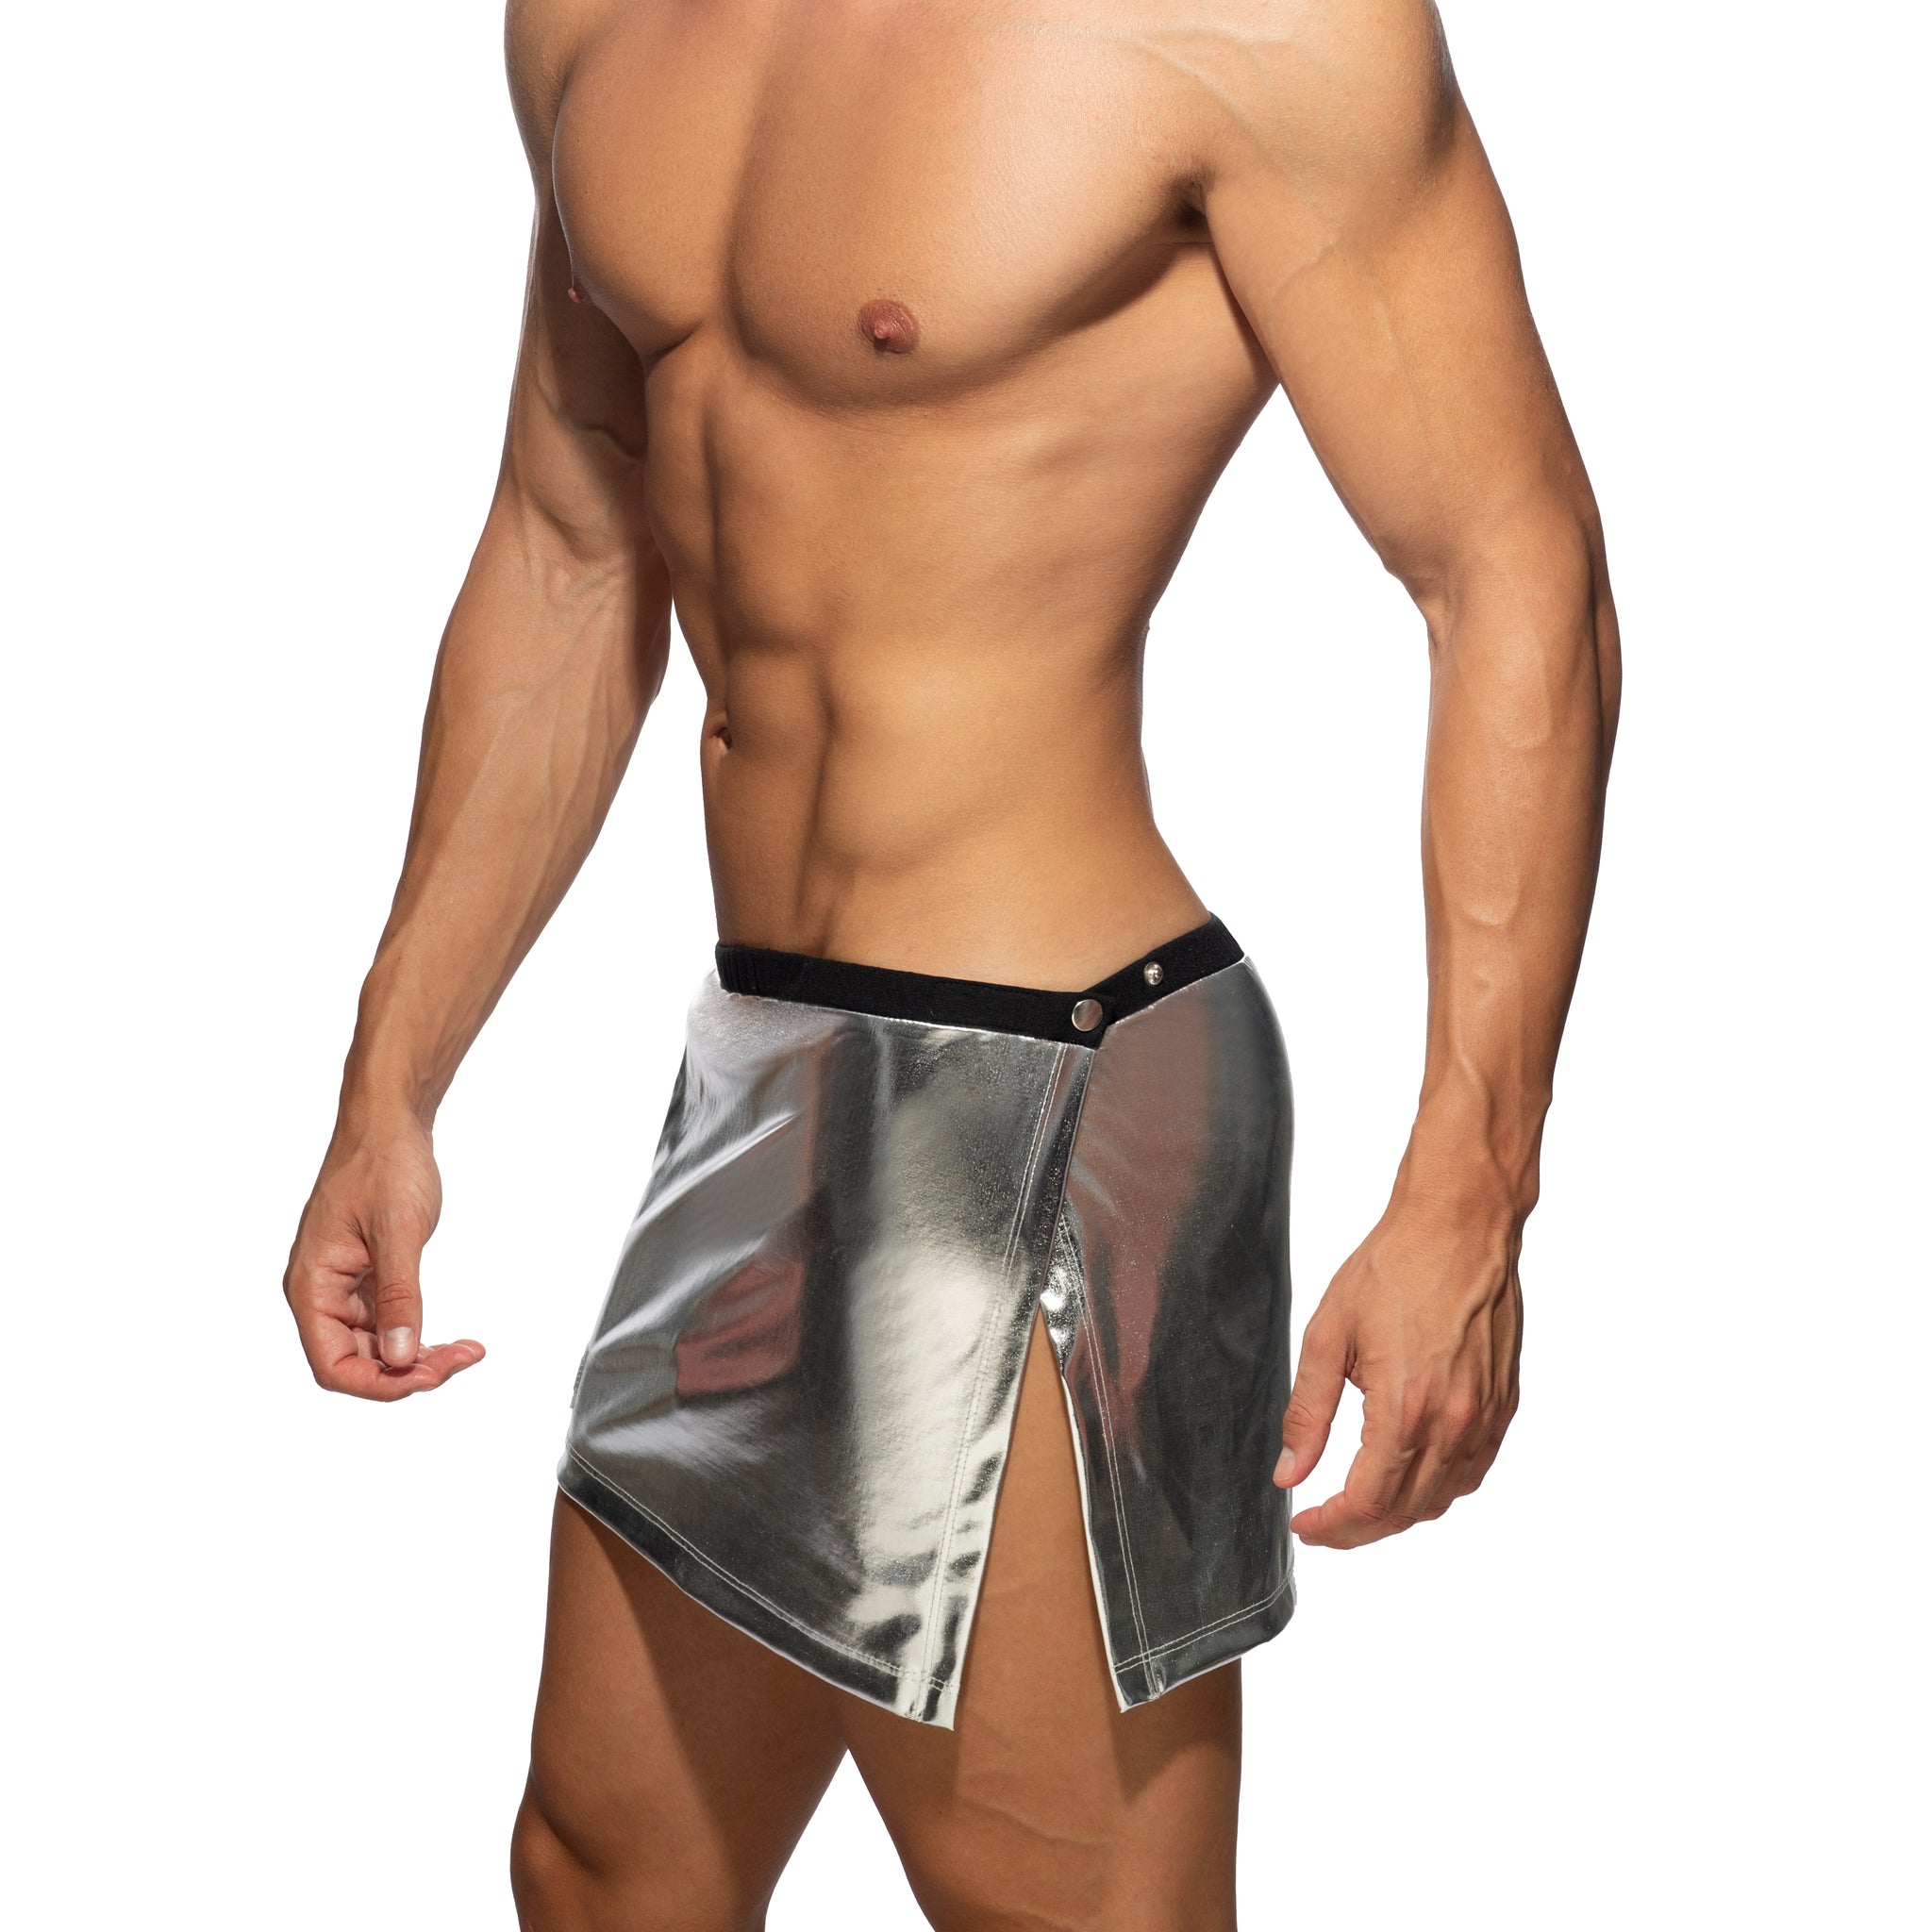 Addicted Party Skirt Silver AD1117